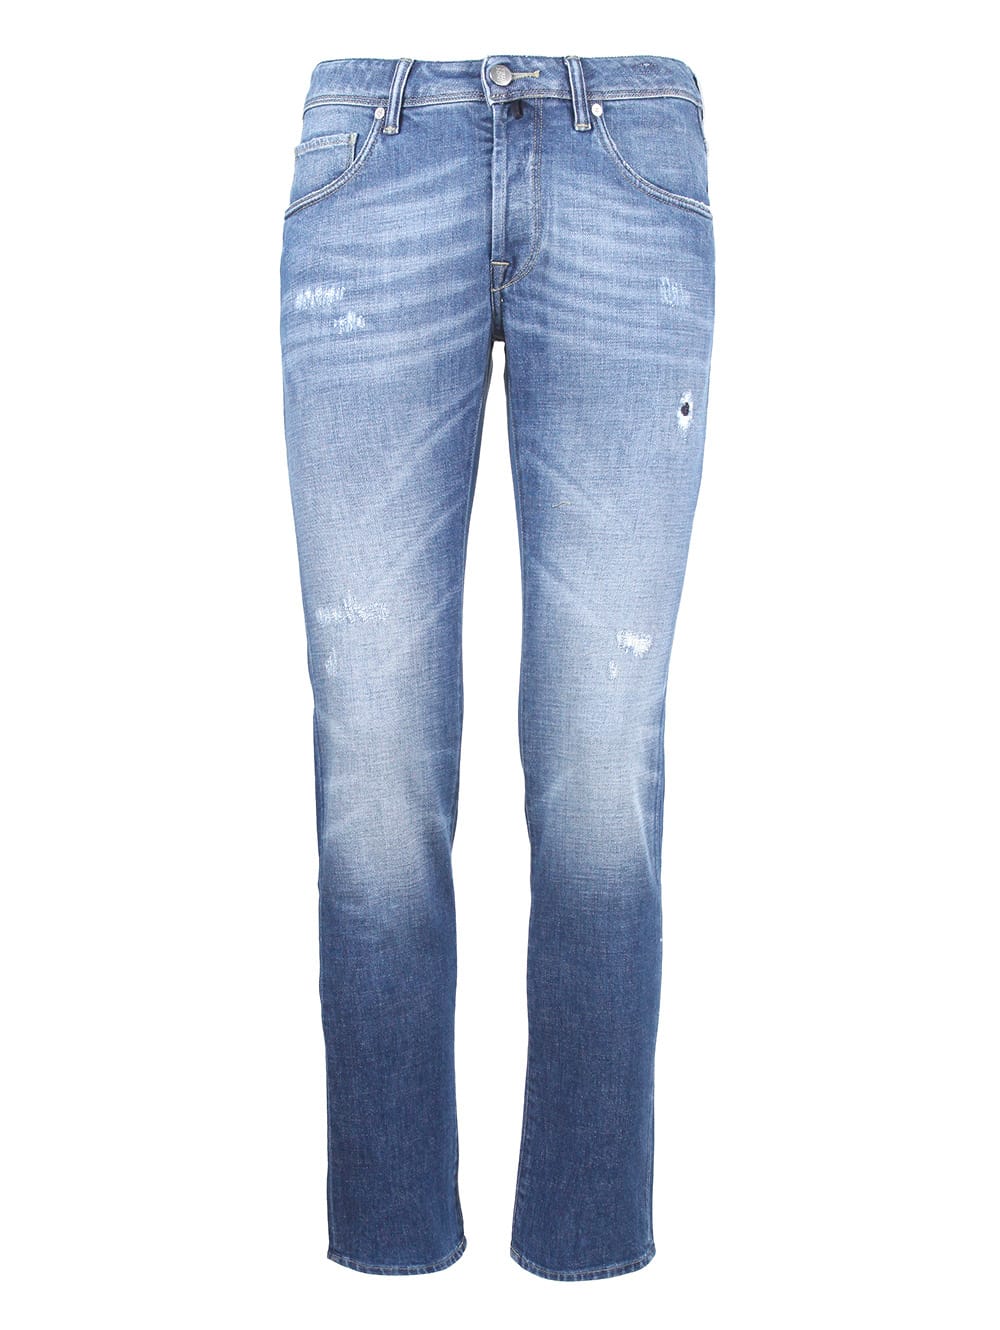 Incotex Blue Division Jeans In Washed Denim With Tears